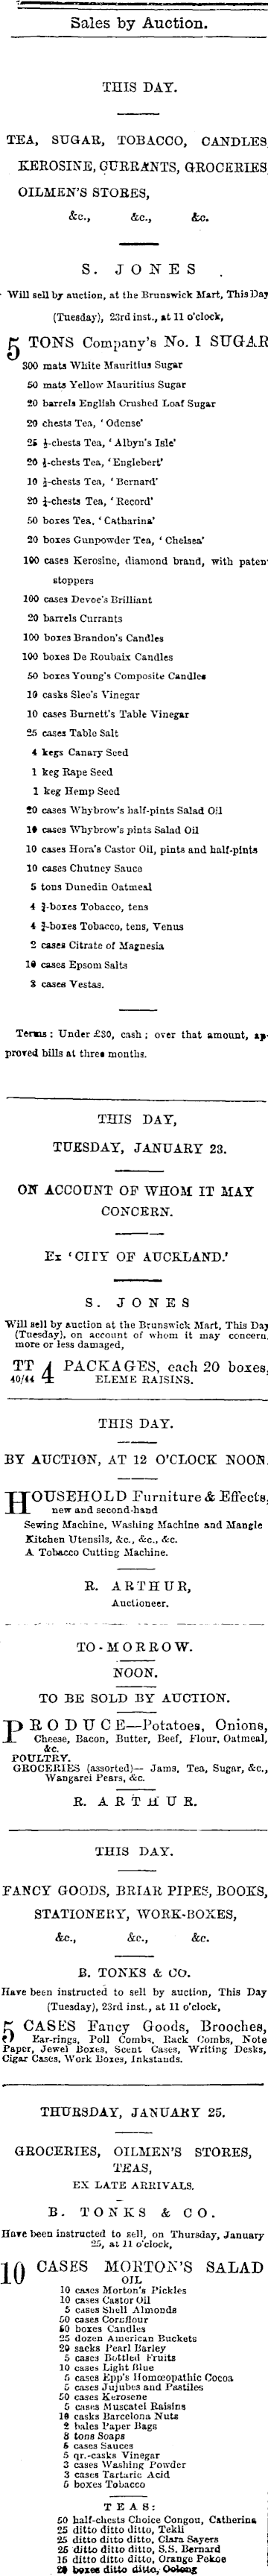 Papers Past Newspapers New Zealand Herald 23 January 1872 Page 4 Advertisements Column 1